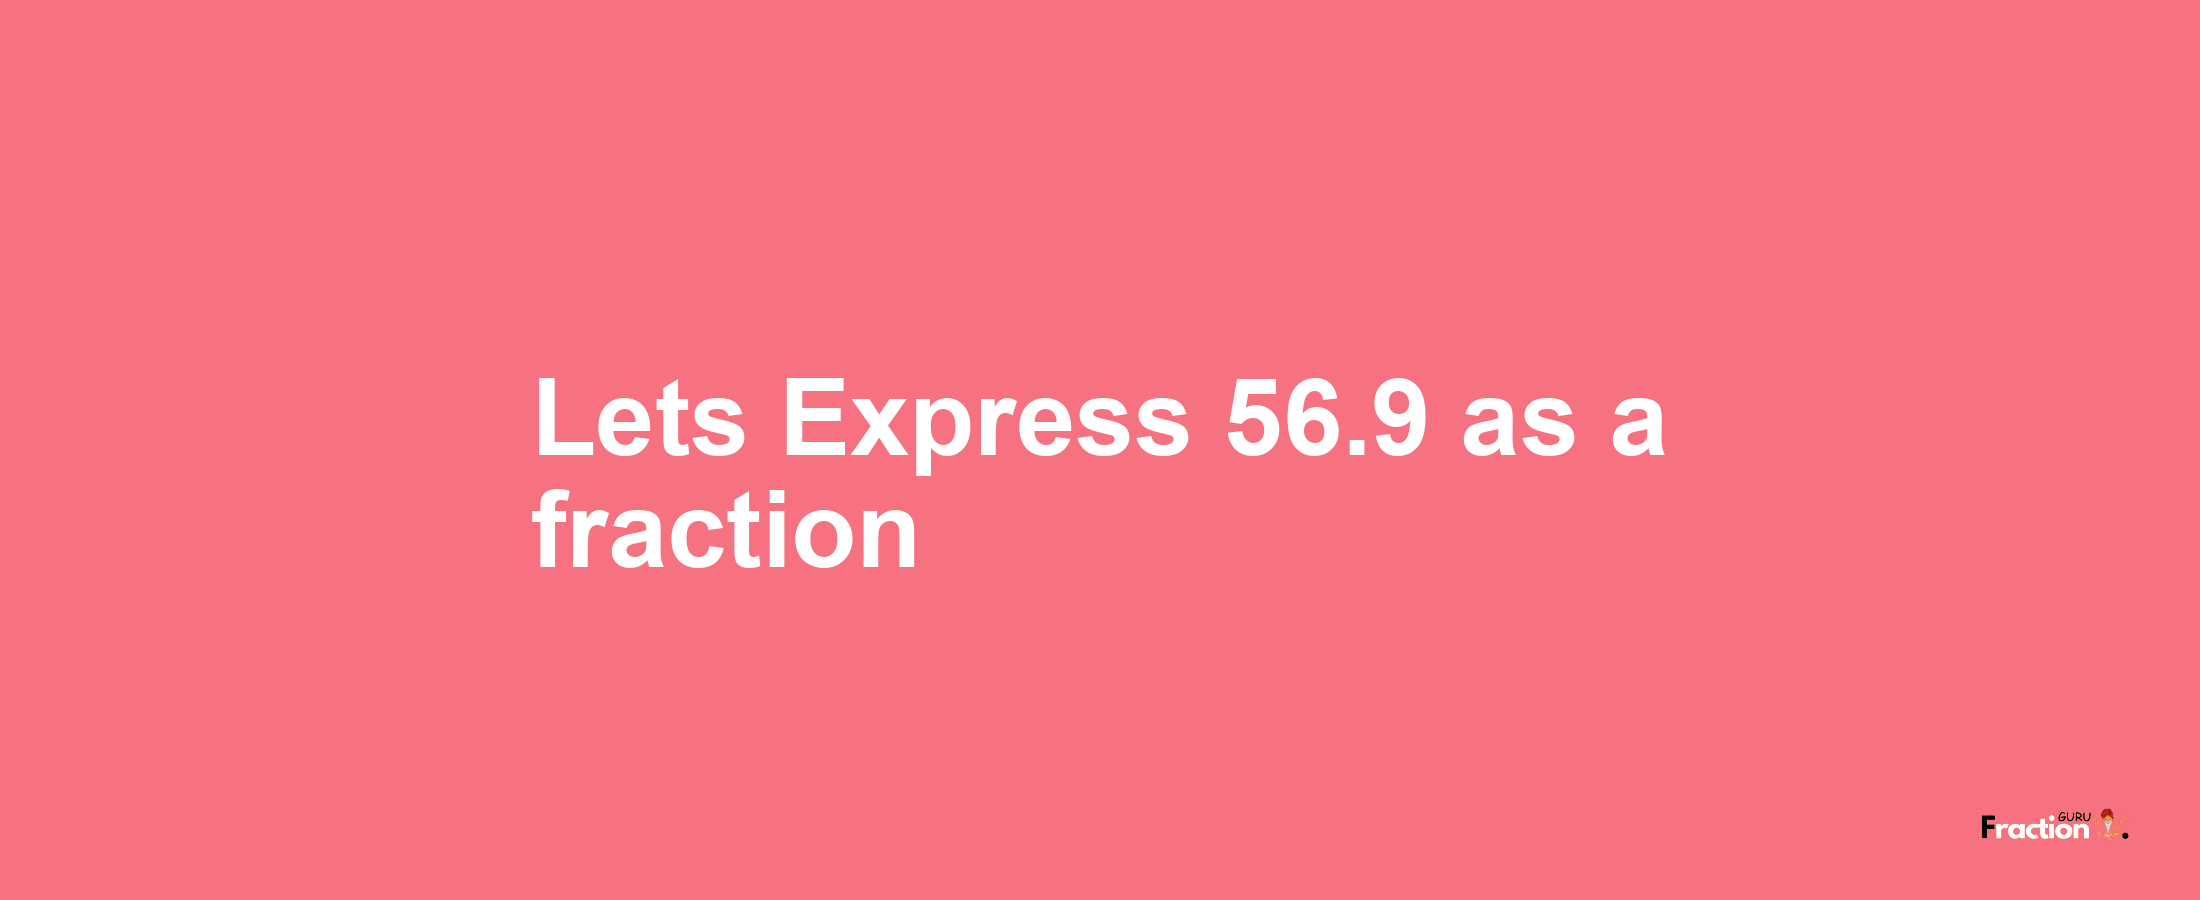 Lets Express 56.9 as afraction